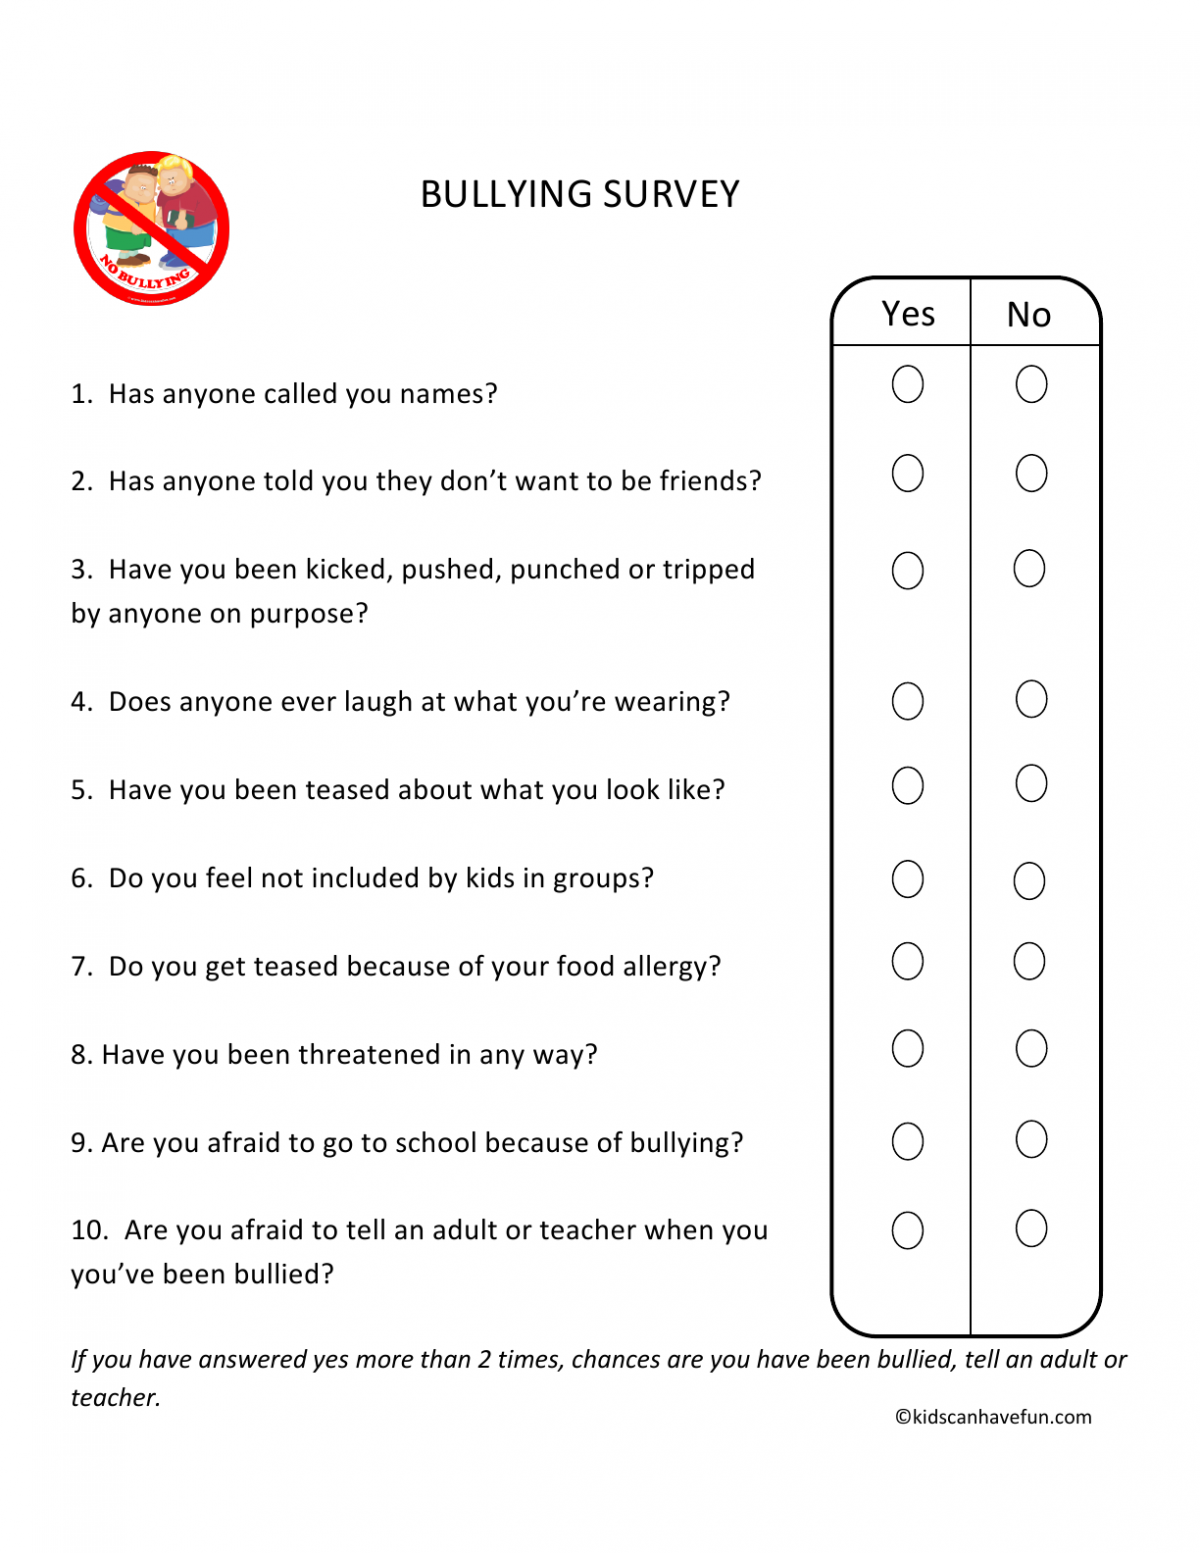 no-bullying-activities-posters-certificates-worksheets